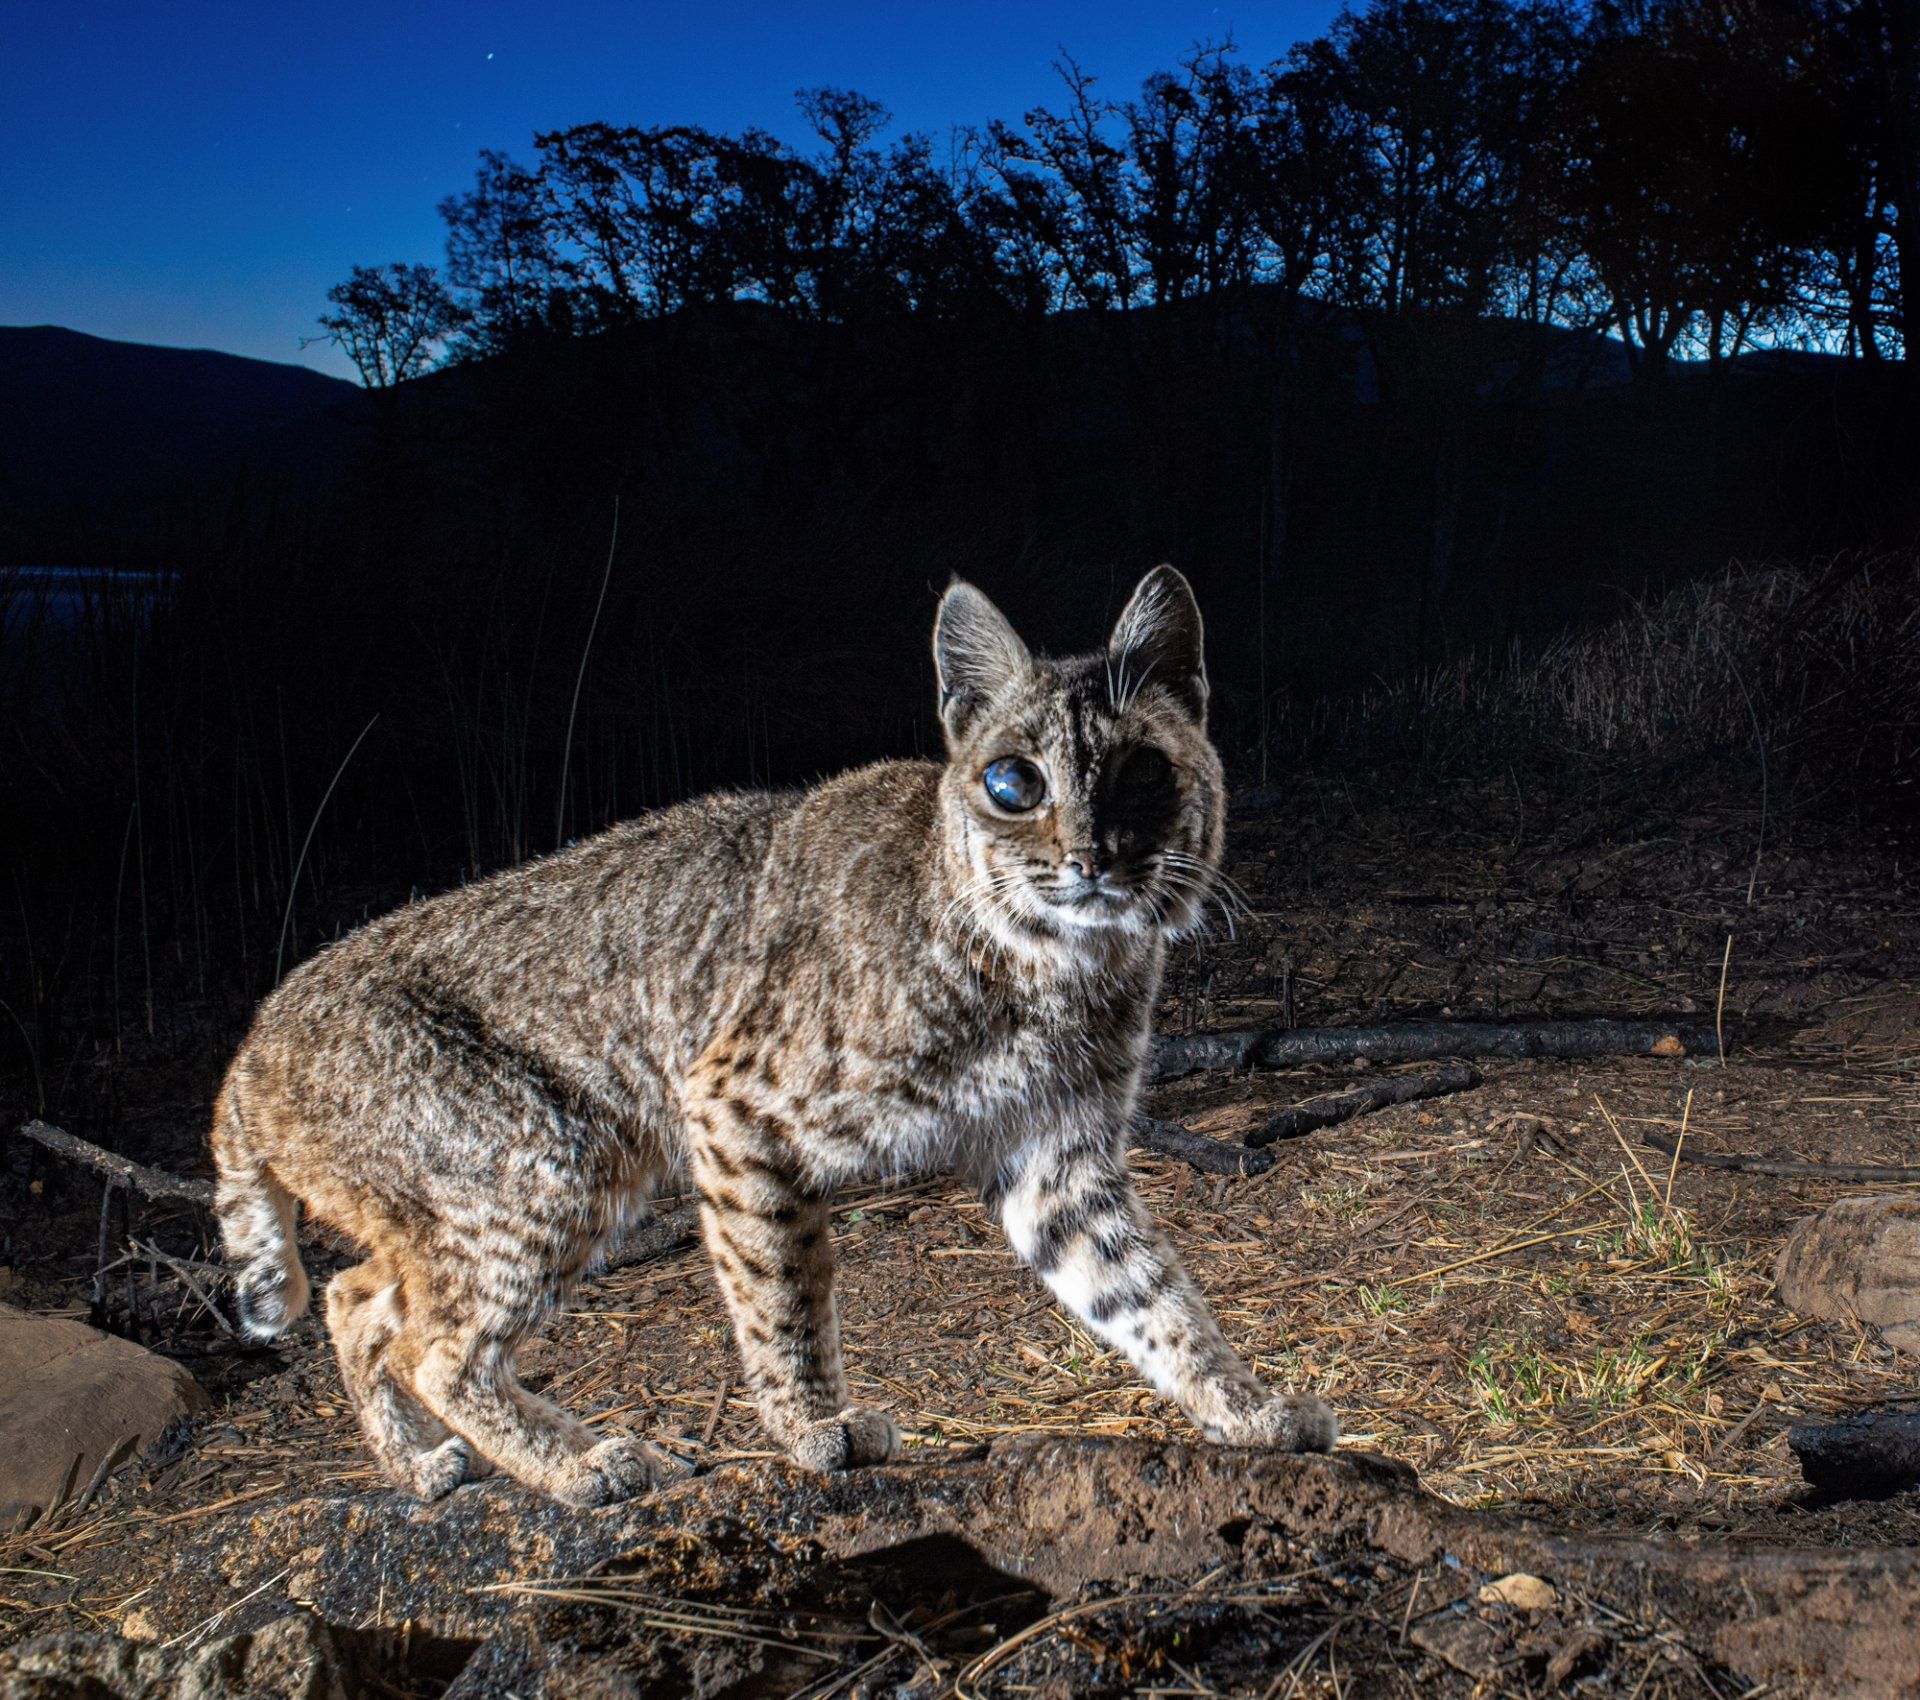 Bobcat with proptosis of the eye.